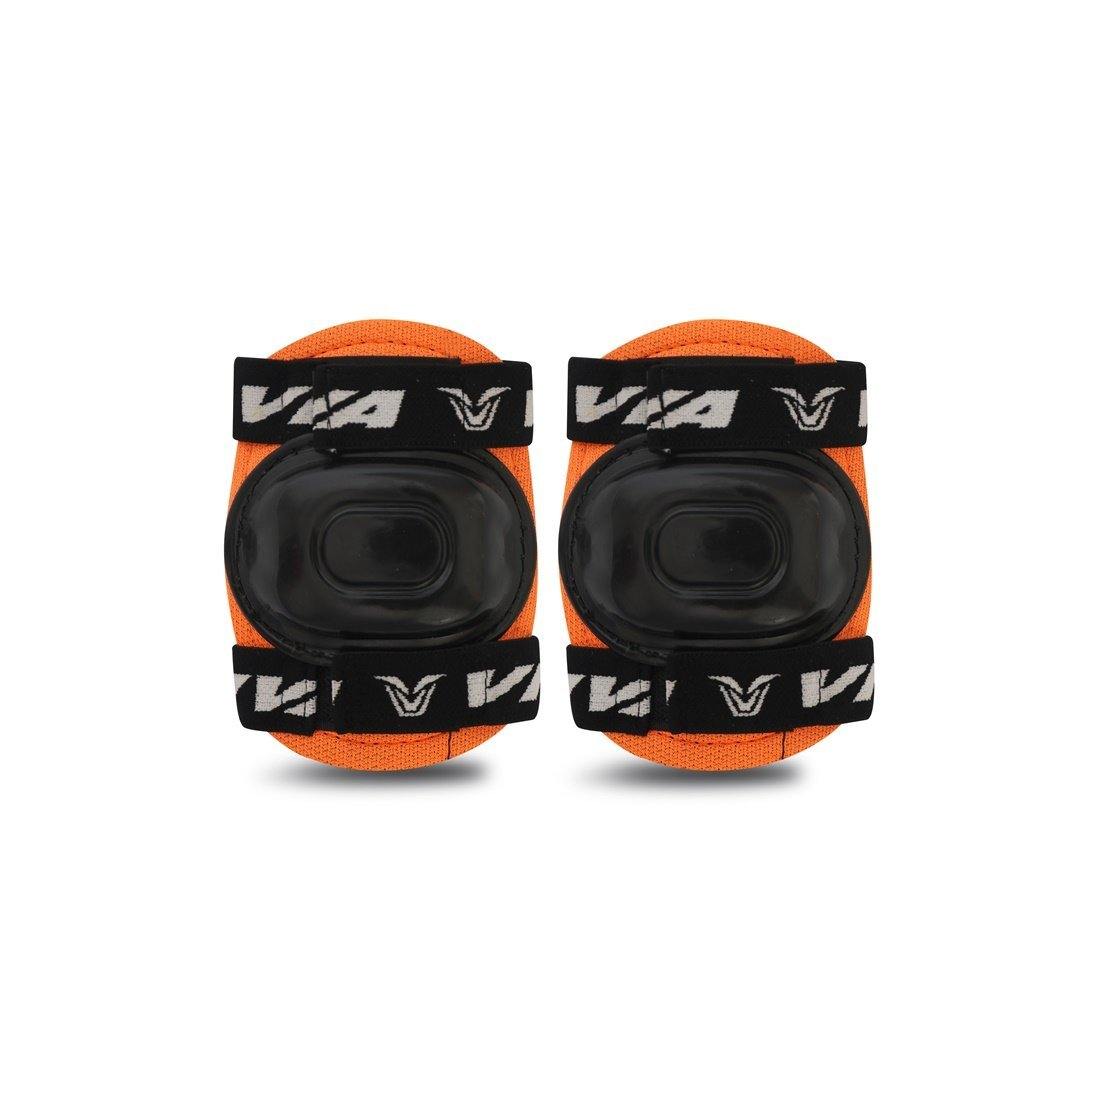 Viva 4 in 1 Protective Set for Skating and Cycling (Orange) - Best Price online Prokicksports.com